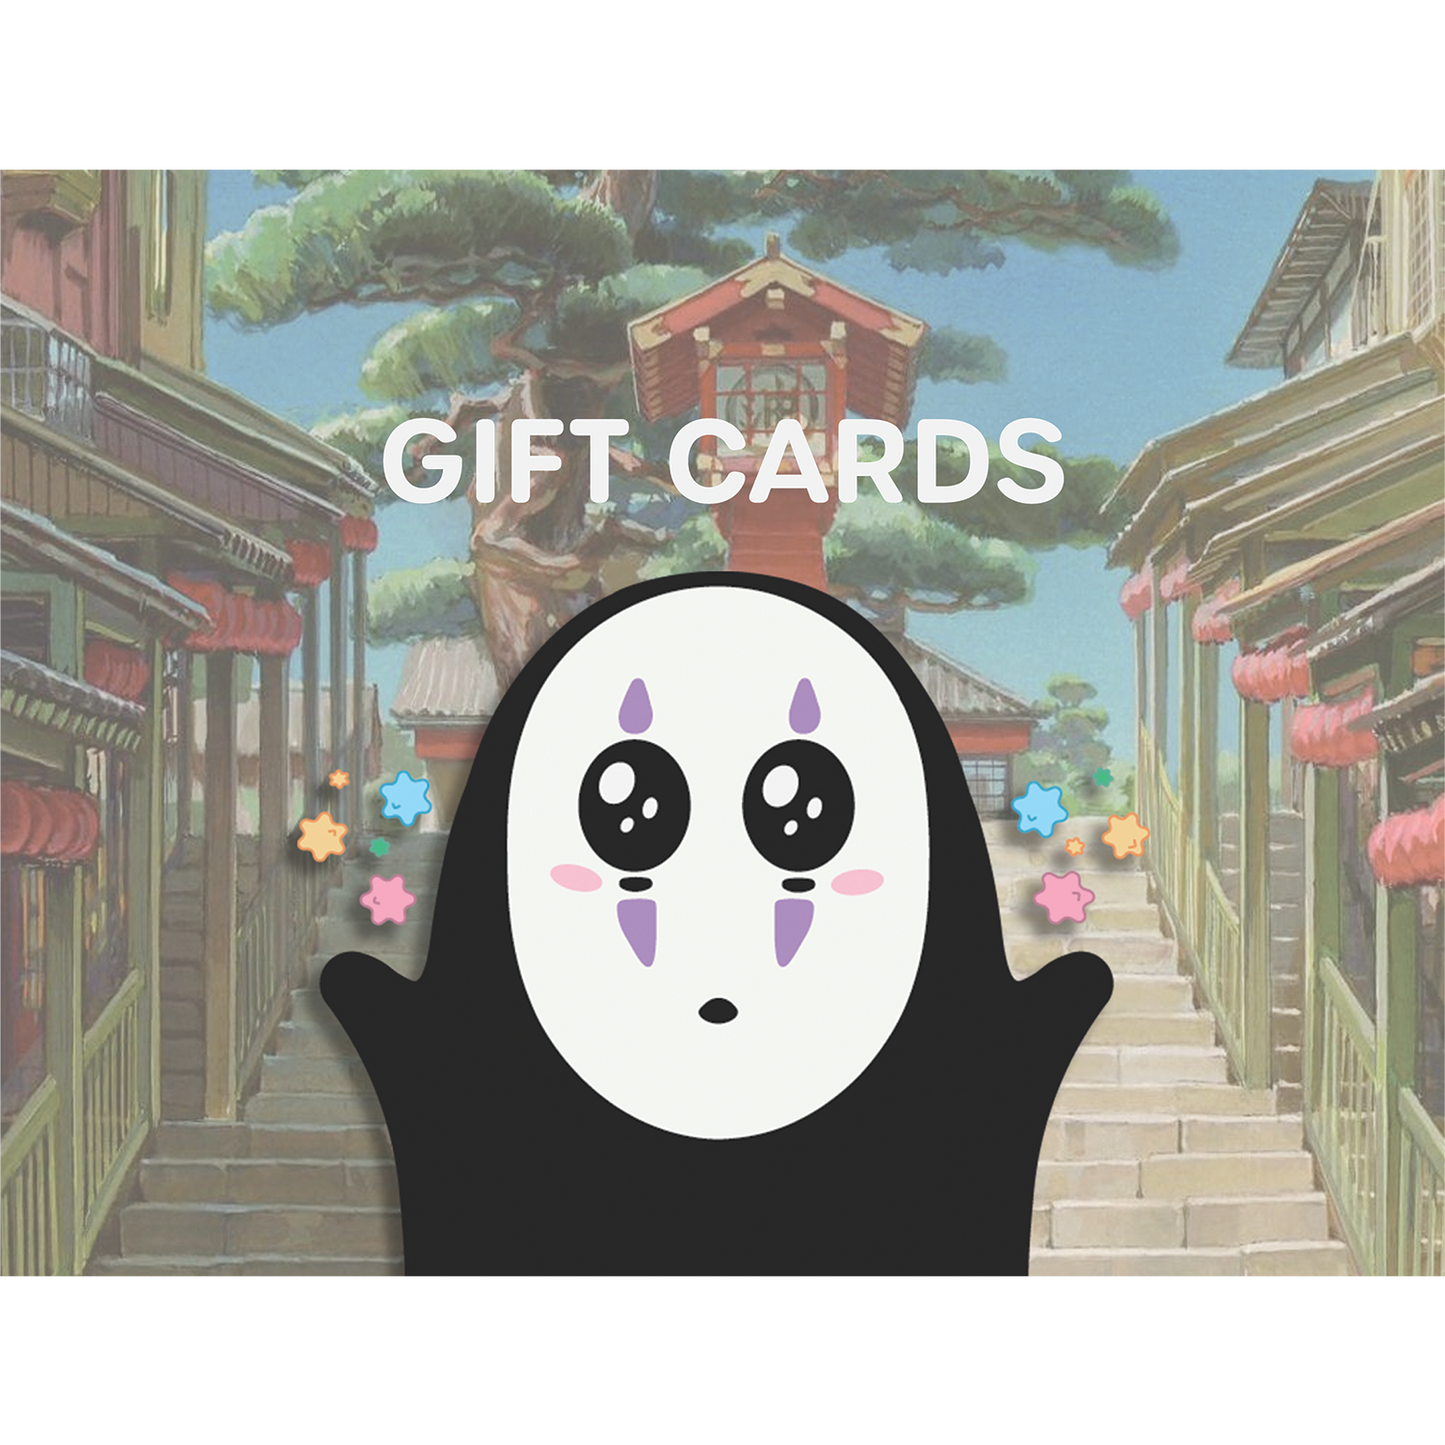 No Face graphic with "Gift Cards" text overlay.